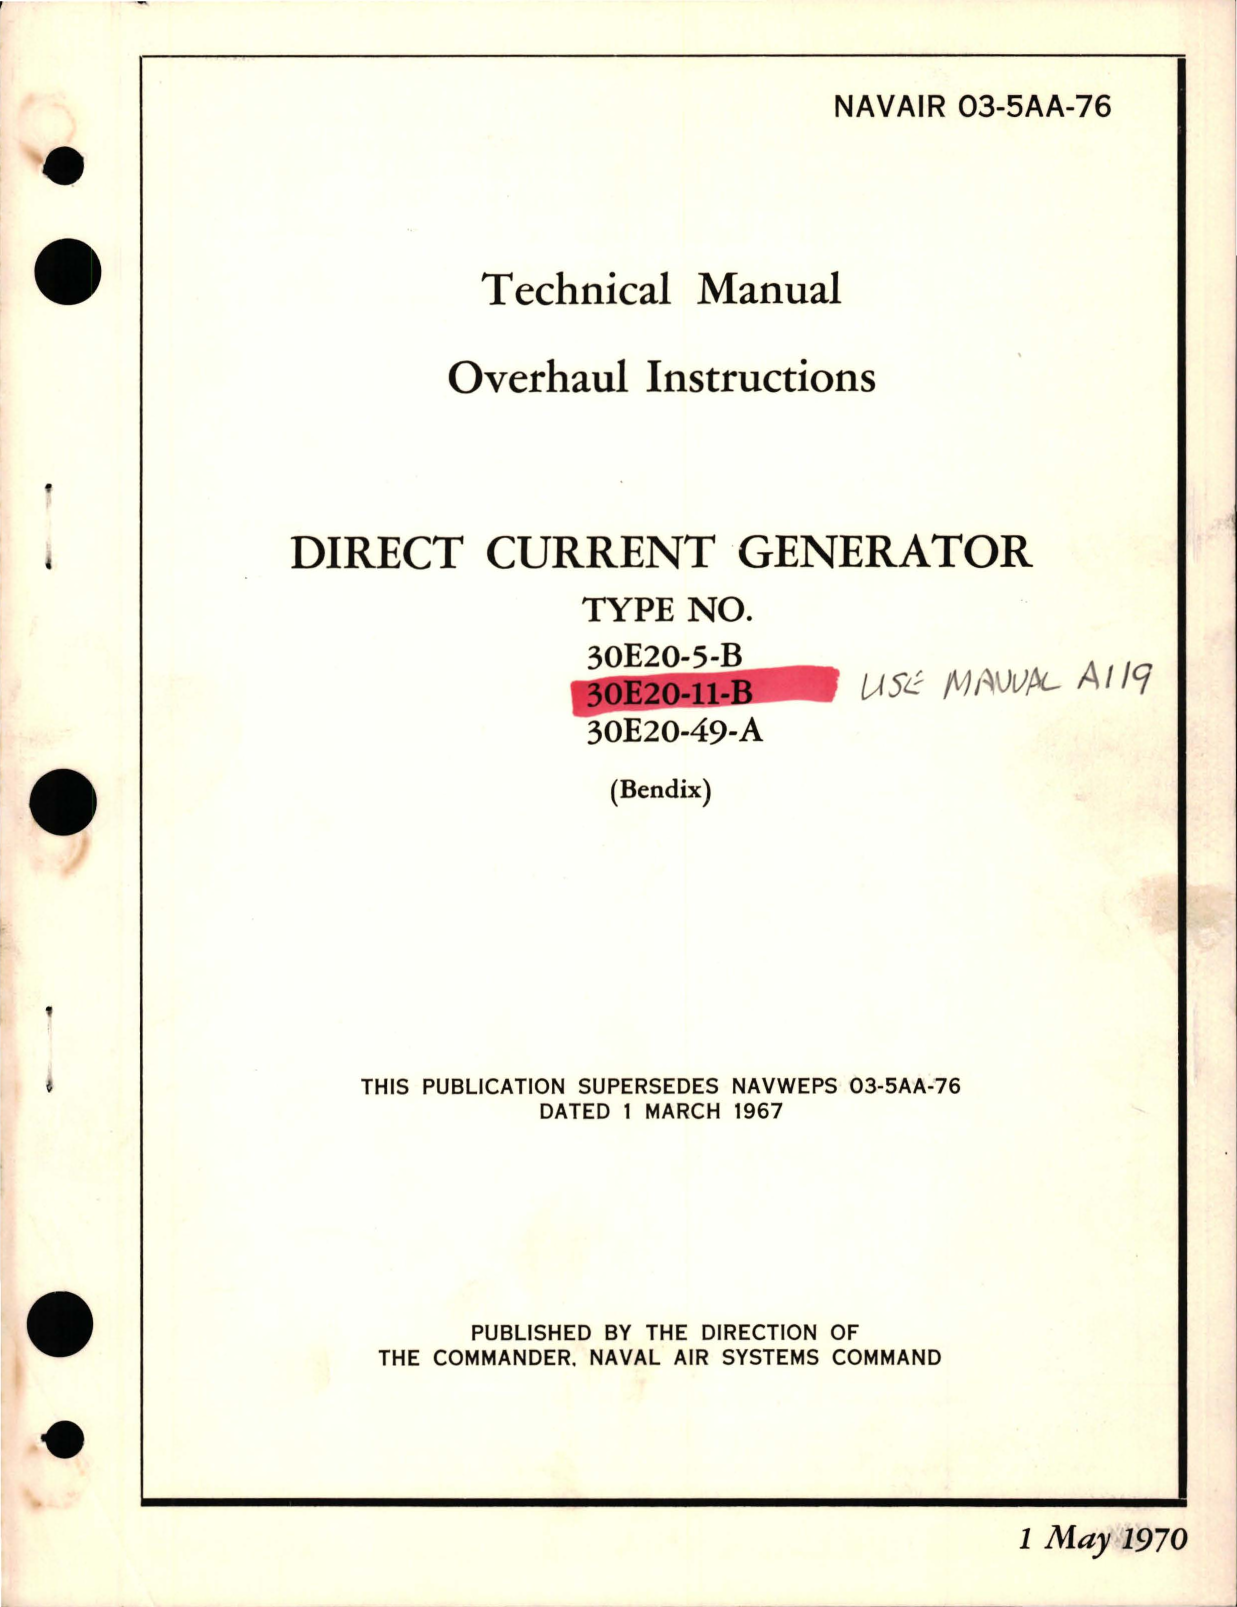 Sample page 1 from AirCorps Library document: Overhaul Instructions for Direct Current Generator - Types 30E20-5-B, 30E20-11-B, 30E20-49-A